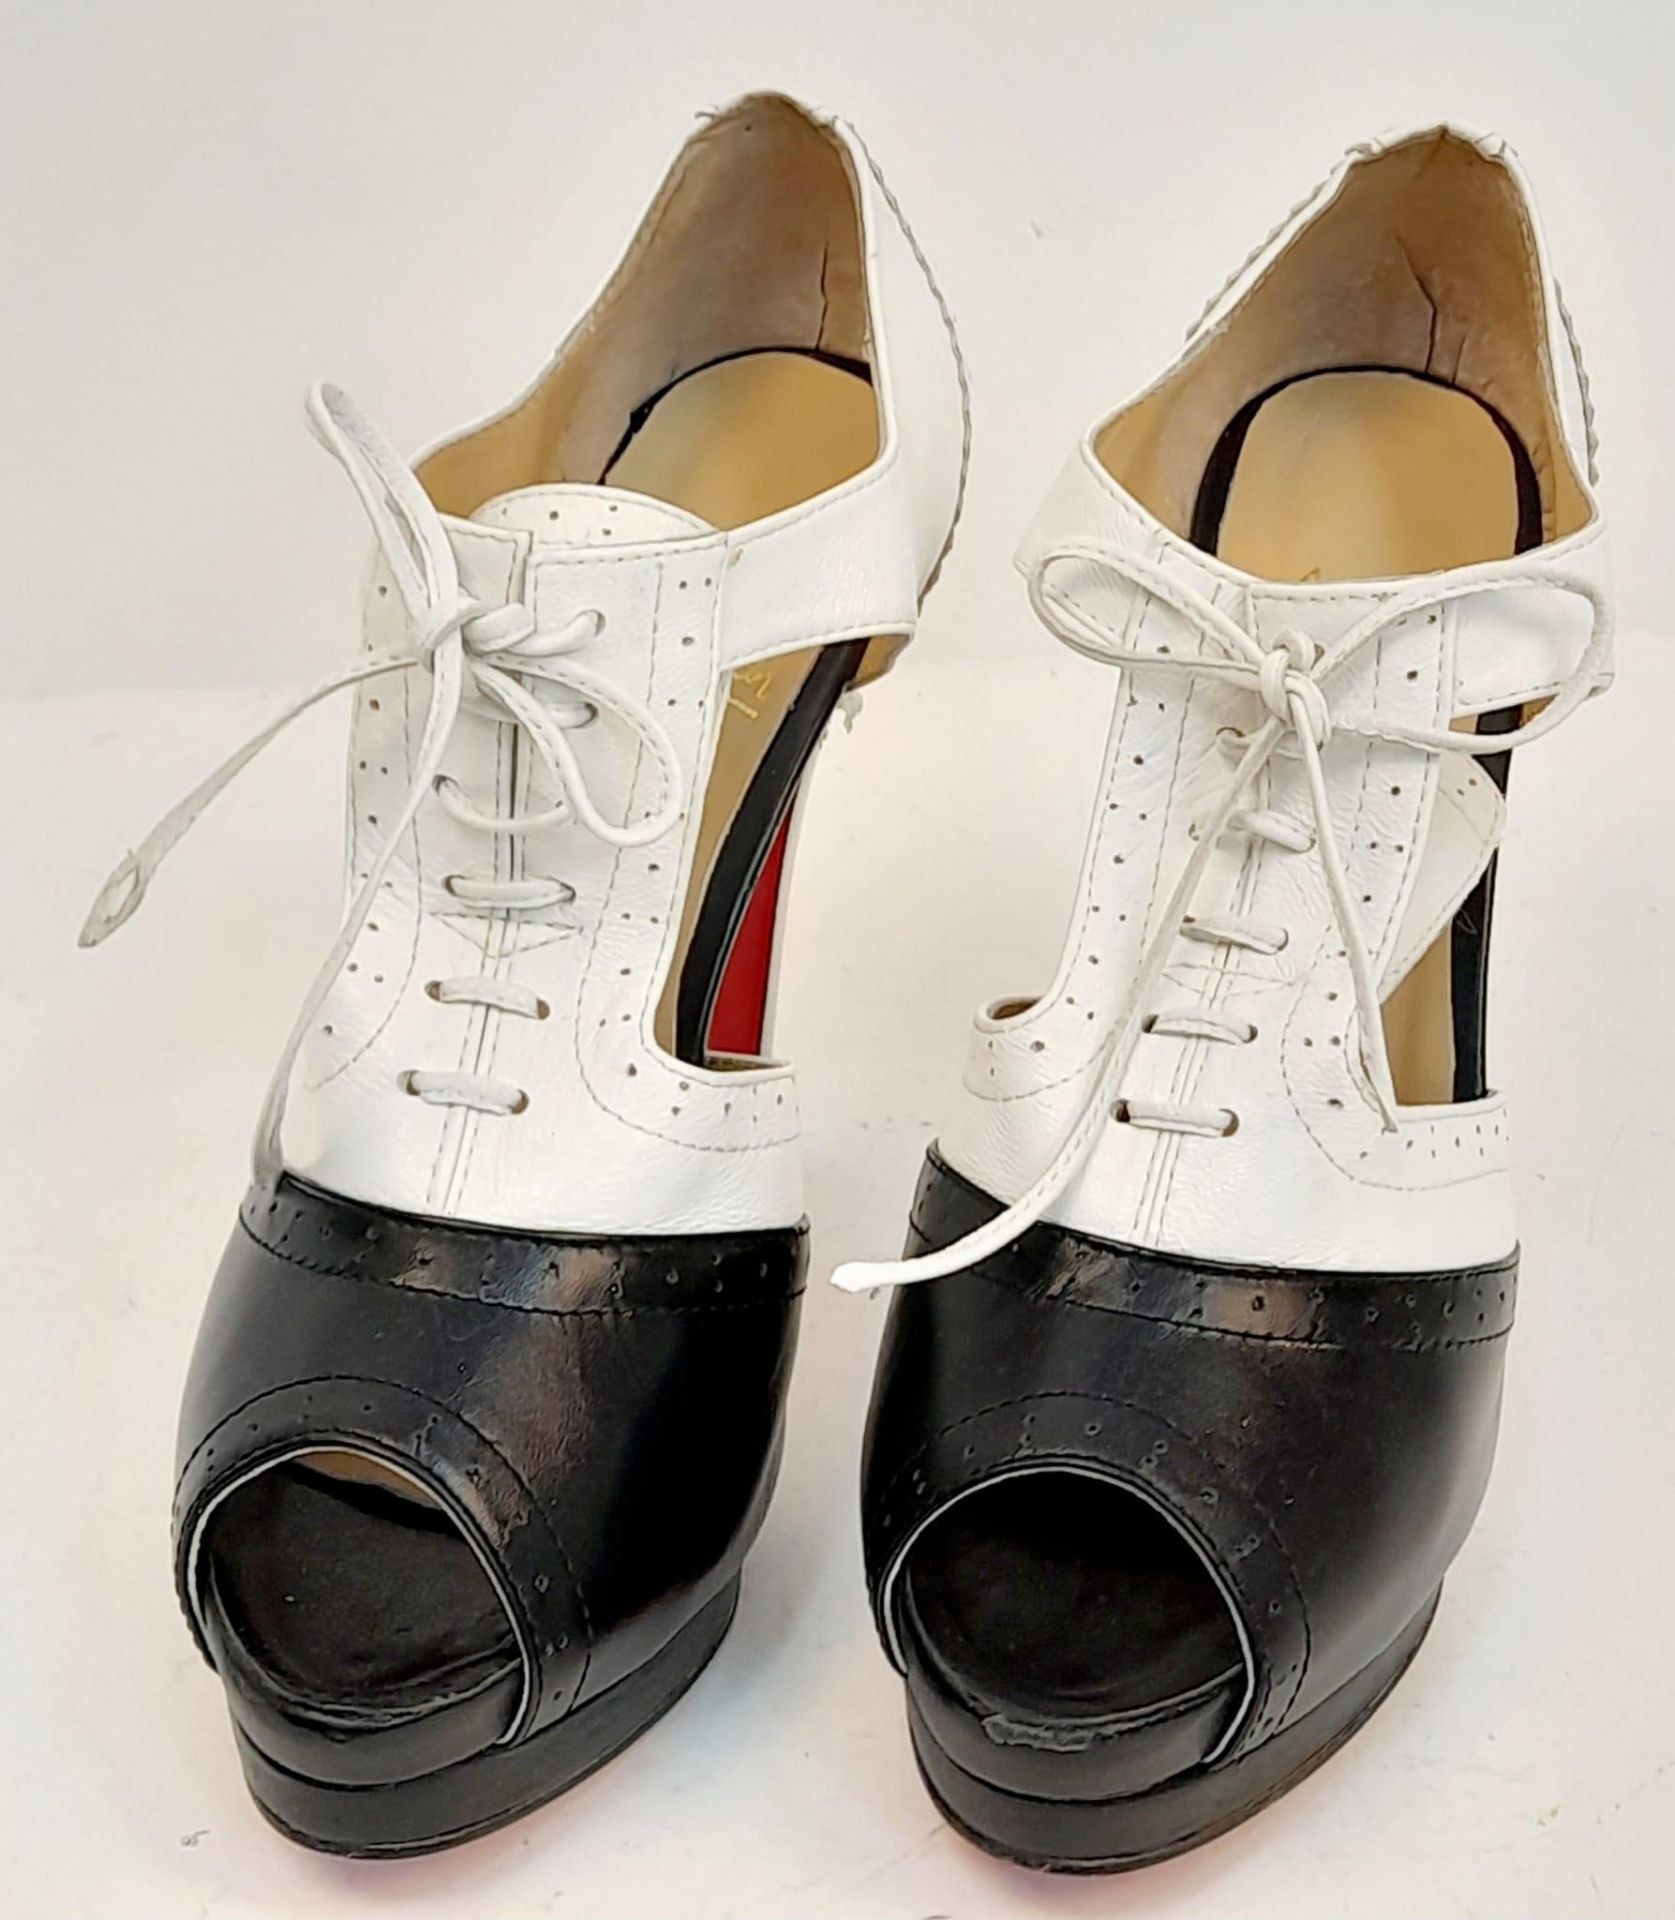 A Pair of Louboutin high heels in black and white leather. Lightly used. Size 40.